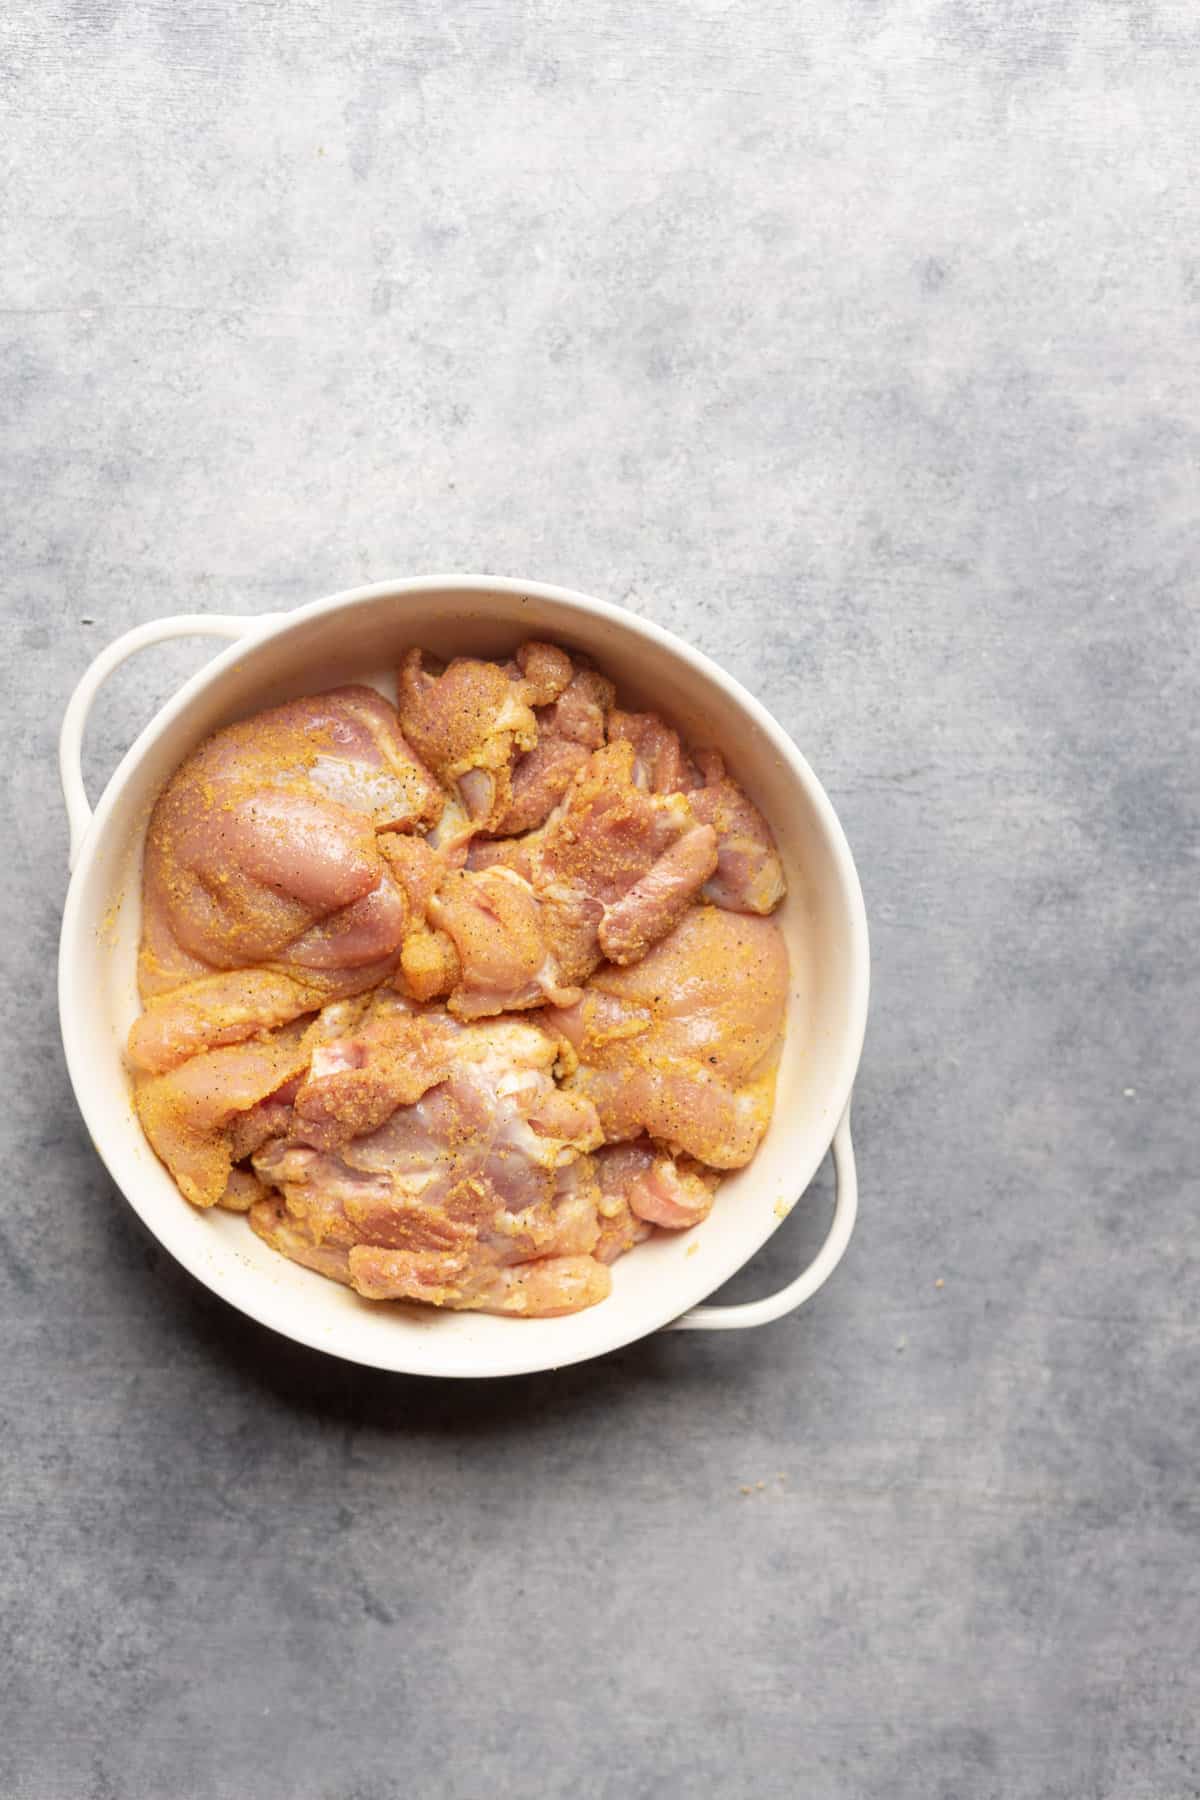 Coated chicken thighs in a large bowl.